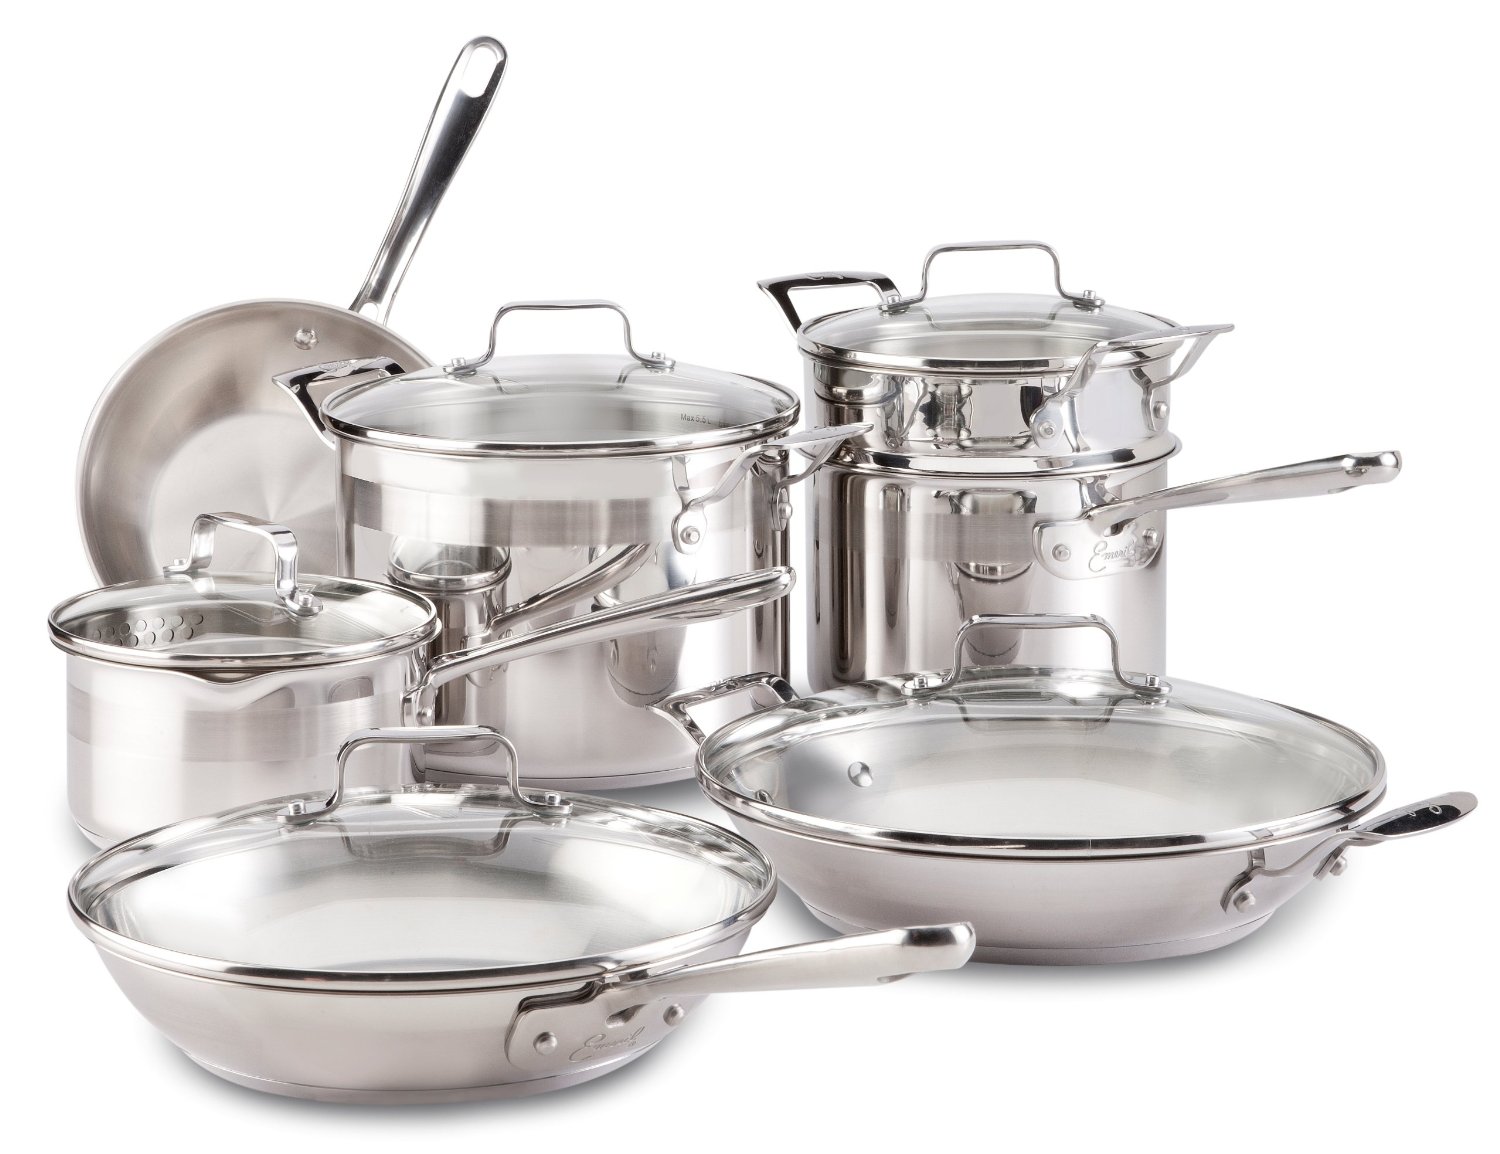 emeril pots and pans oven safe